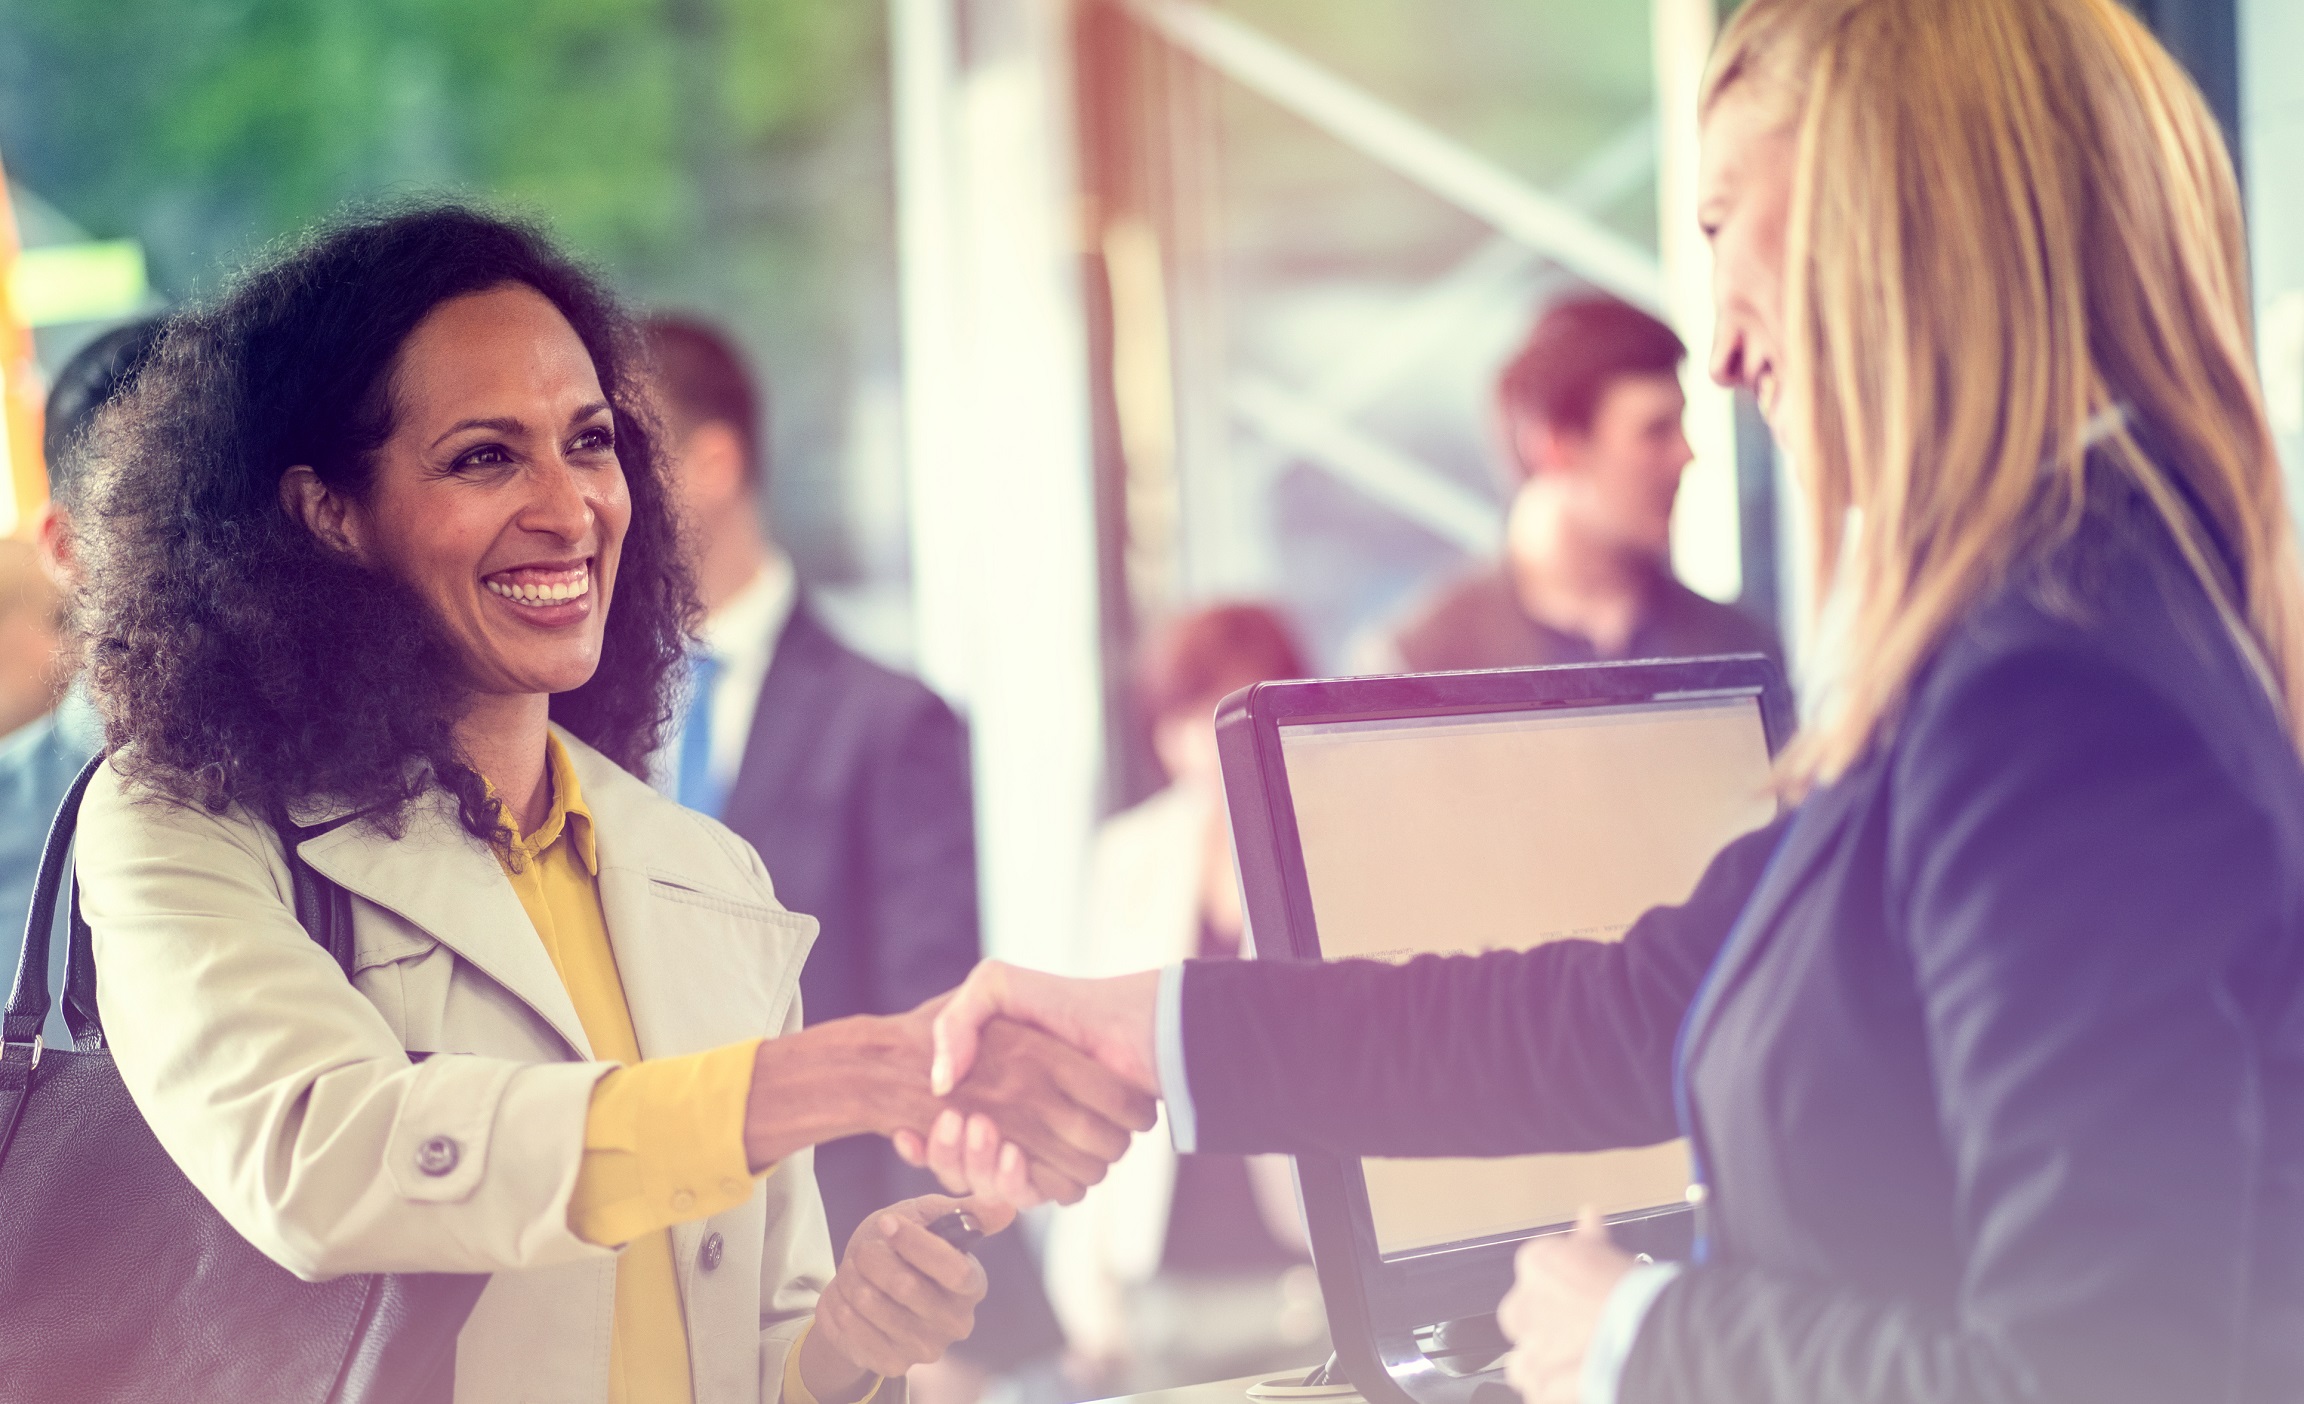 Happy looking woman shaking hands with a credit union teller